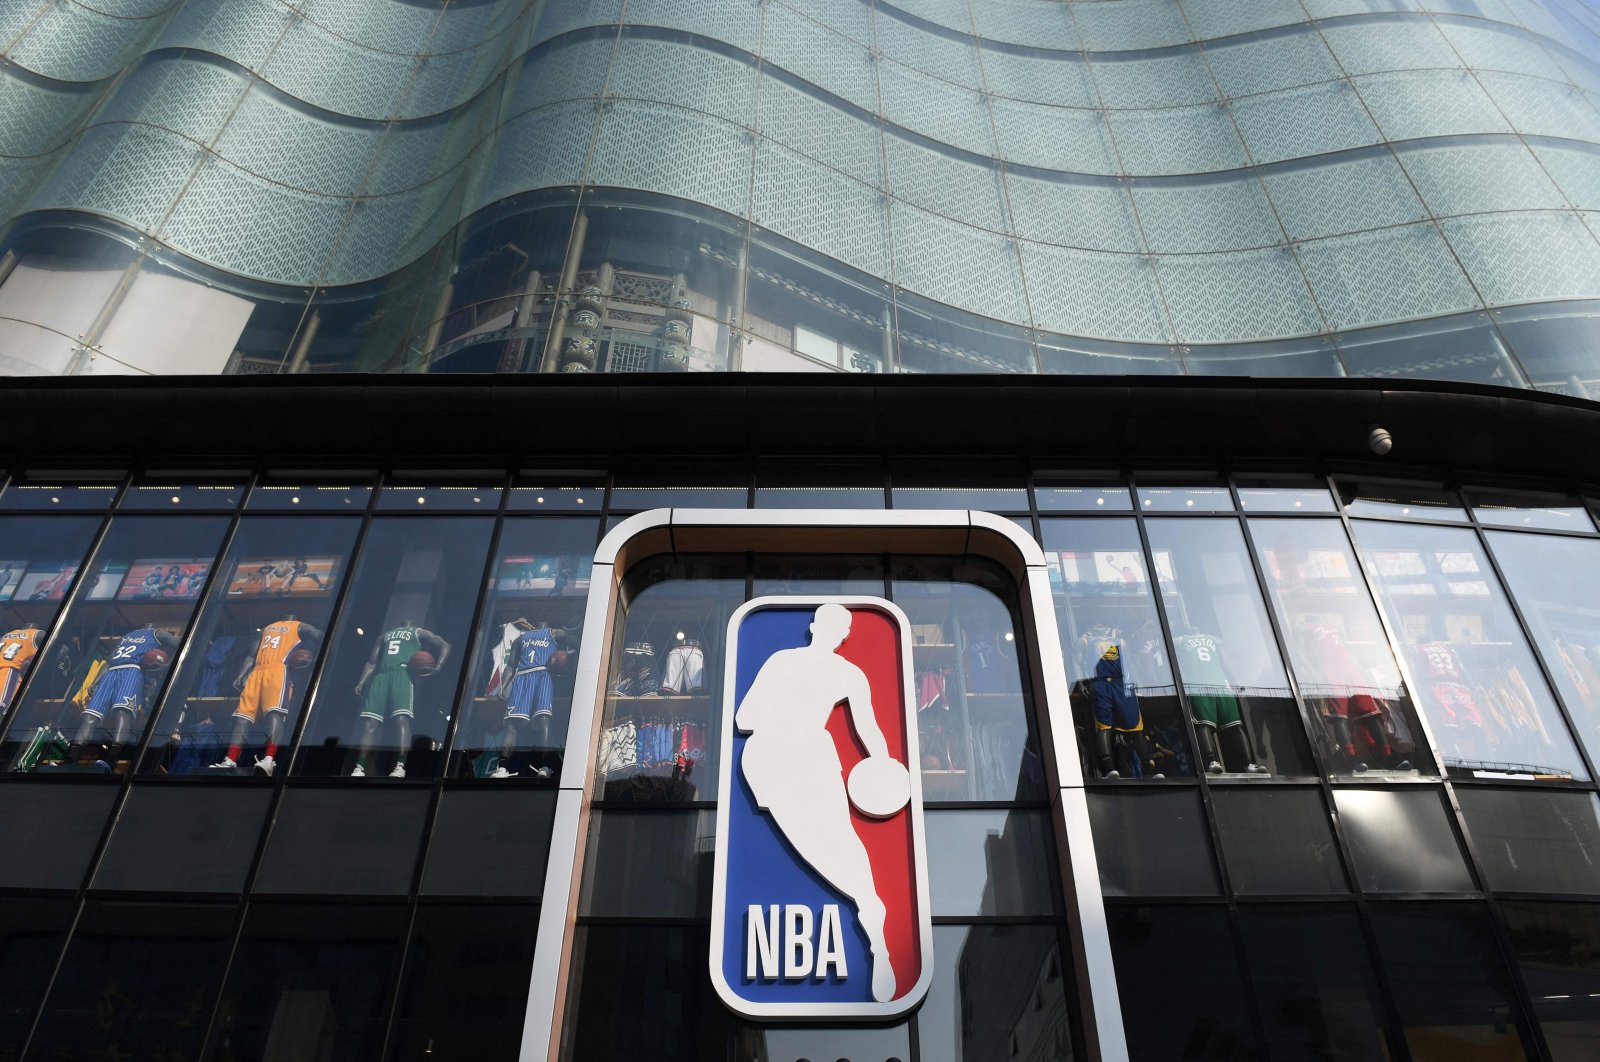 The National Basketball Association (NBA) logo is seen at an NBA store in Beijing, China, Oct. 9, 2019. (AFP Photo)